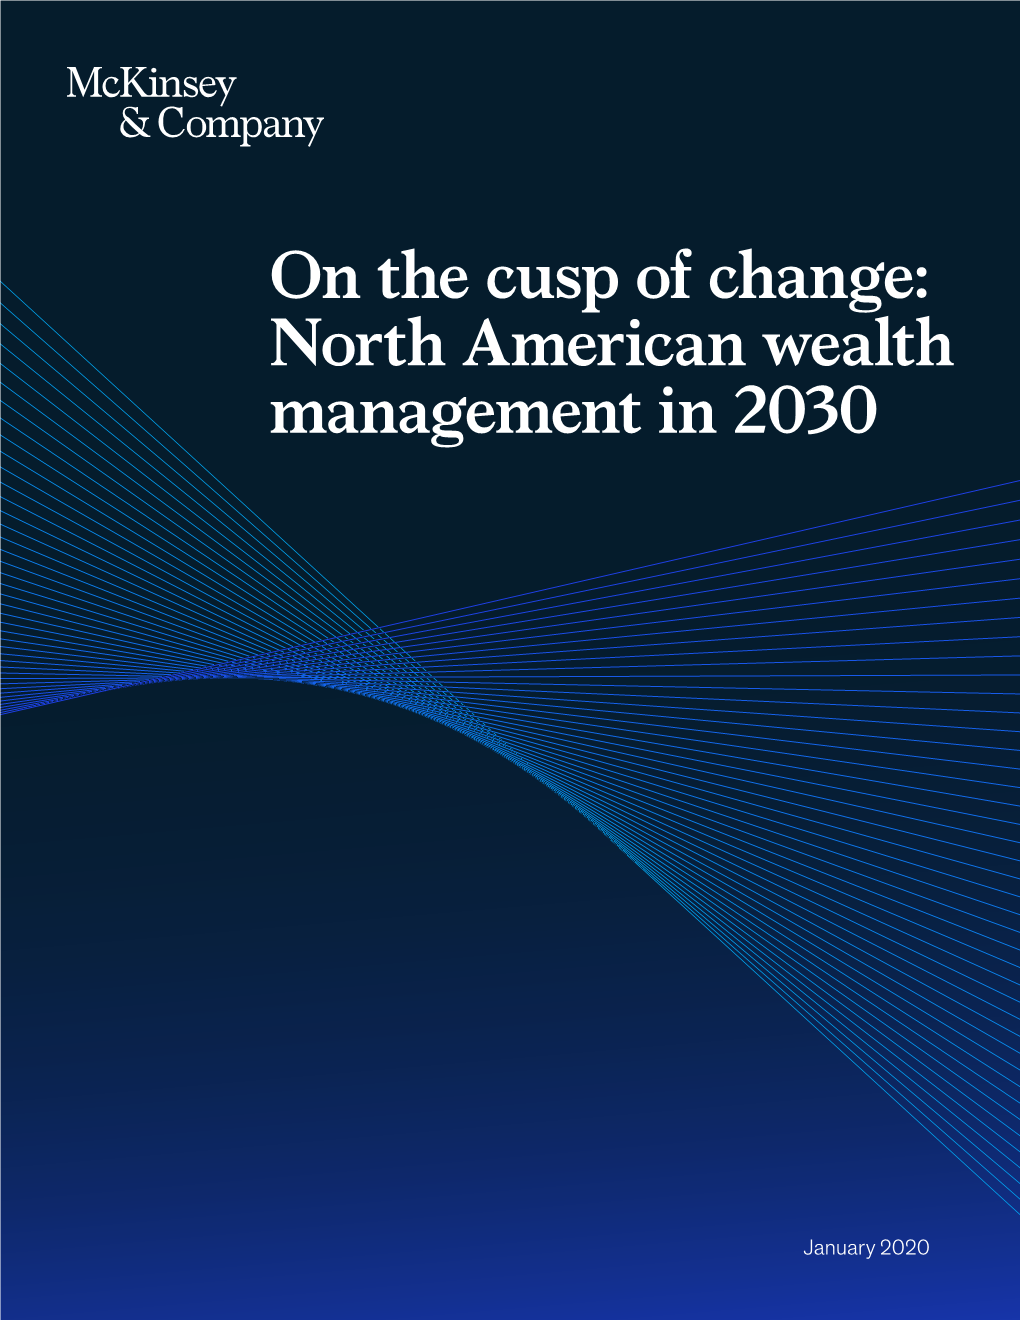 North American Wealth Management in 2030